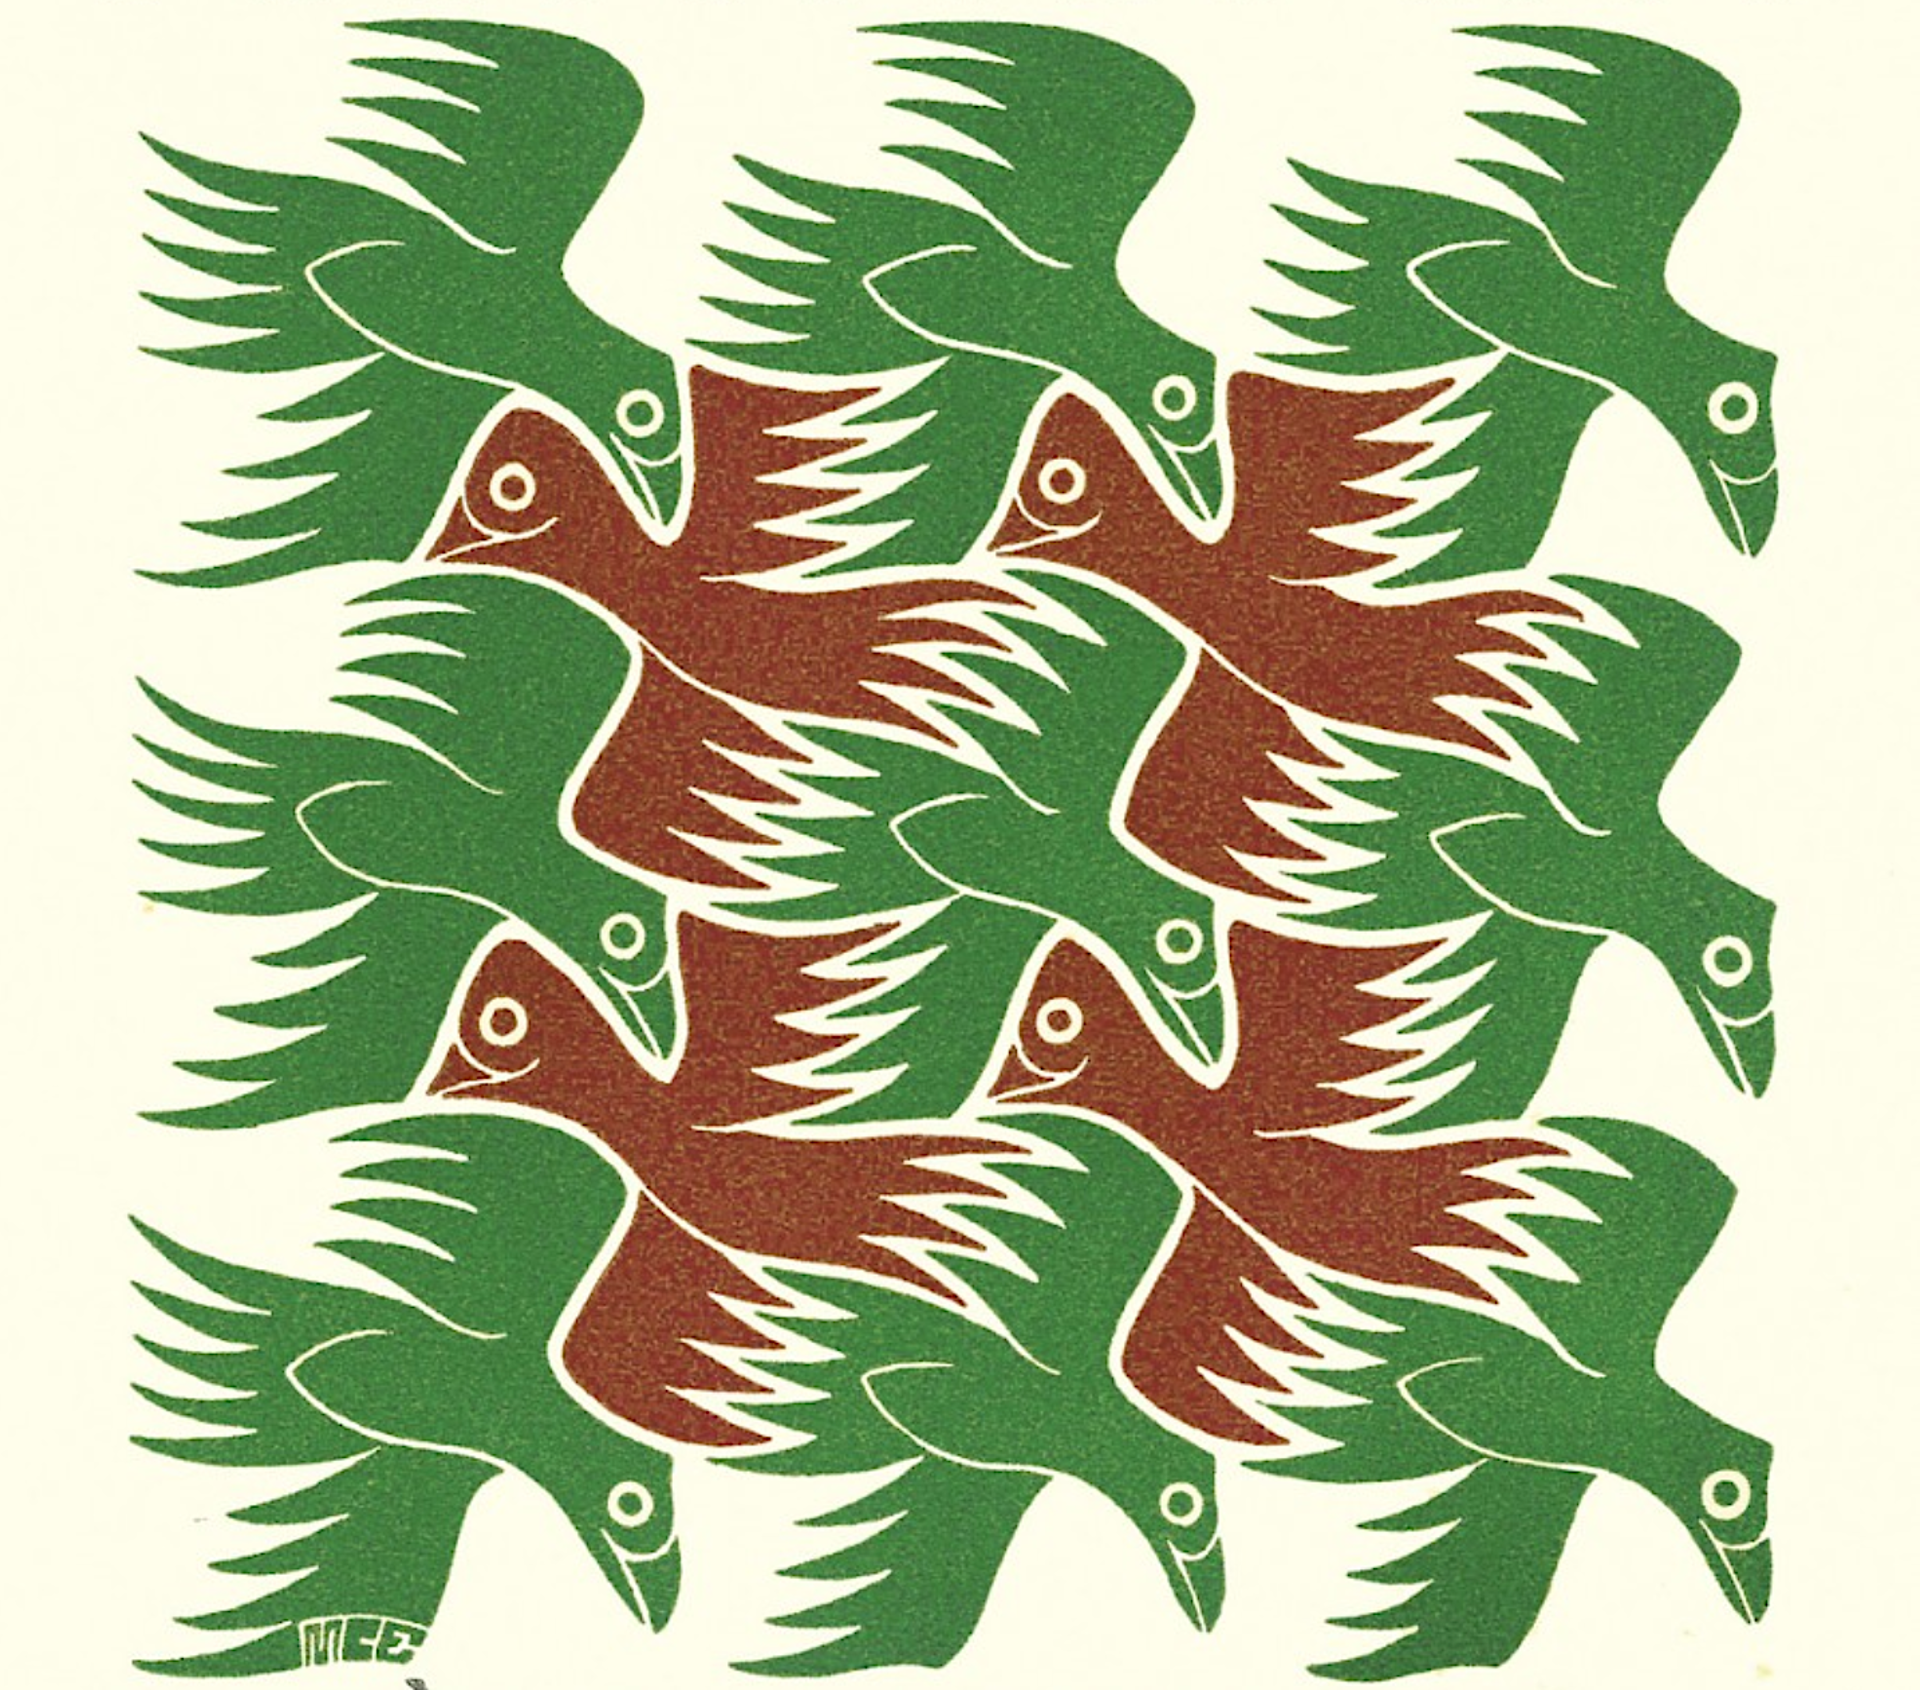 Air - Strens New Year's Greeting Card (Birds) by M.C. Escher